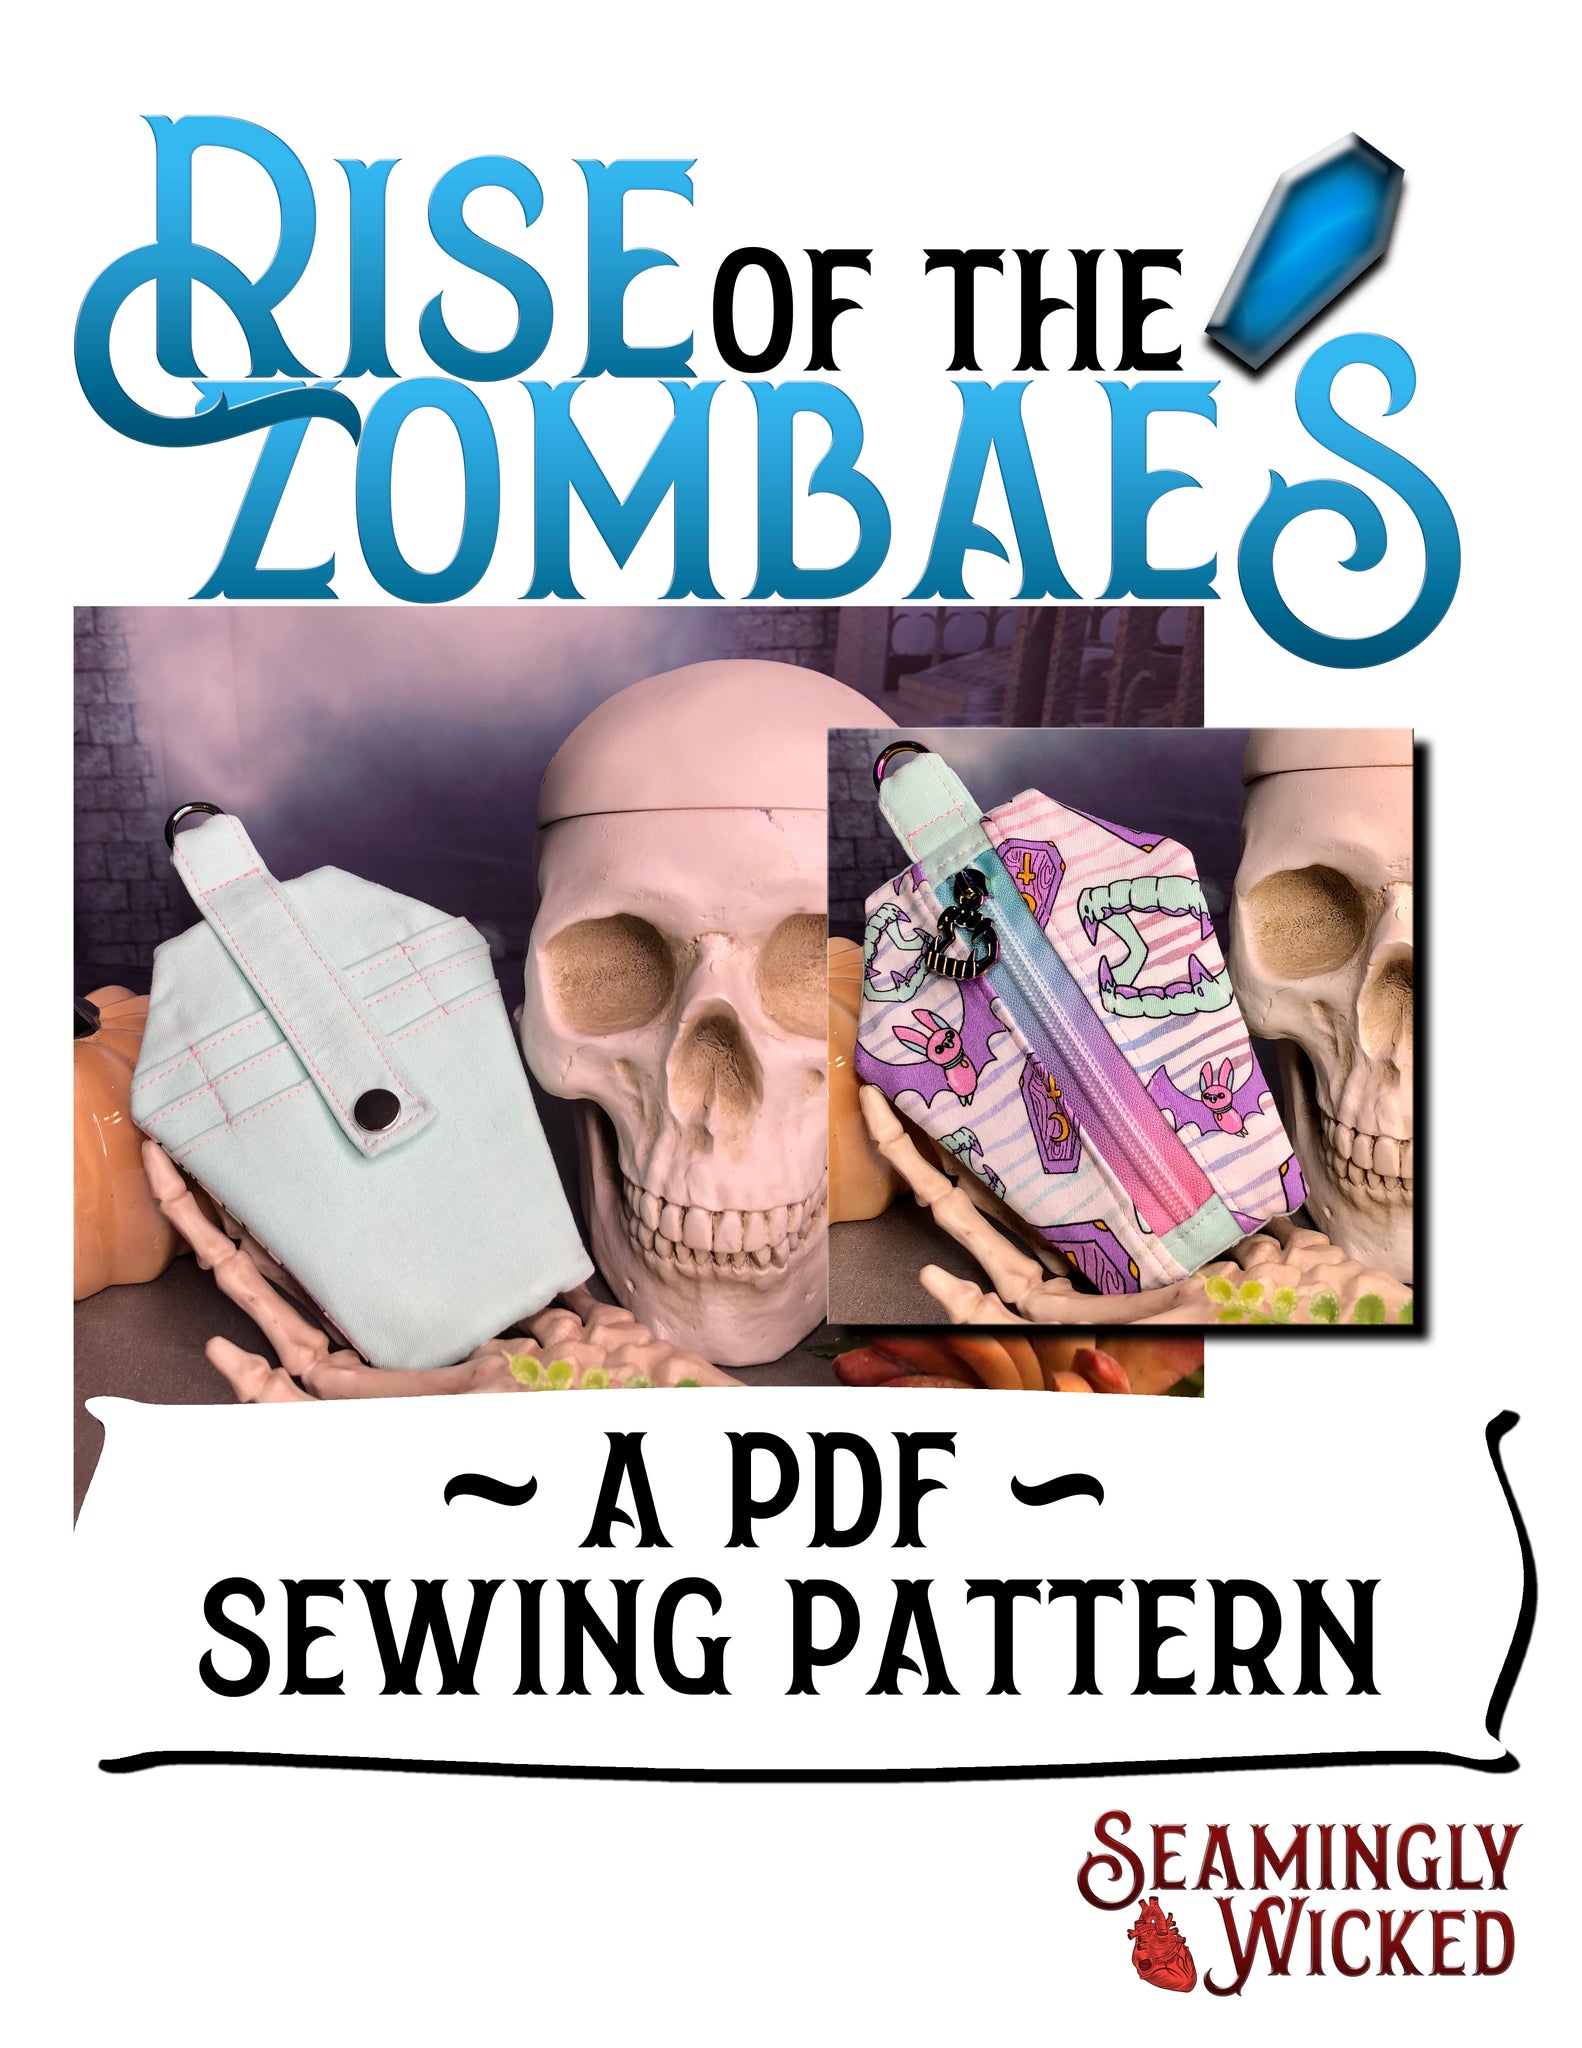 Rise of the Zombae’s Coffin Wallet PDF Sewing Pattern (SVG Ffiles included!)